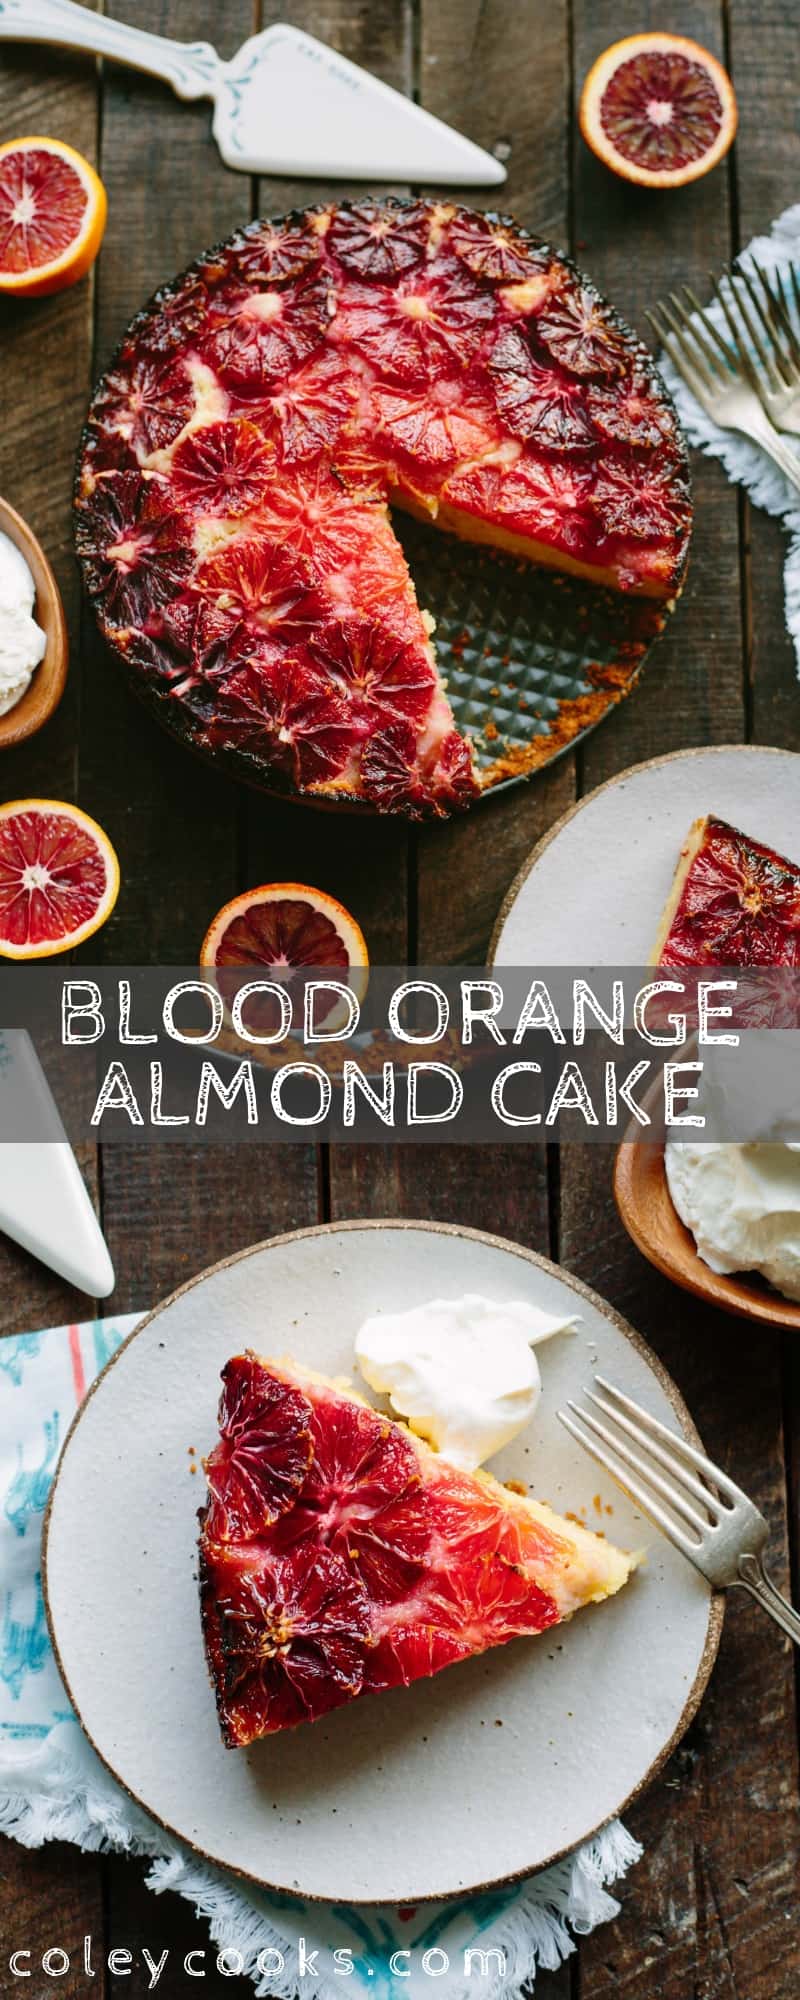 This recipe for Blood Orange + Almond Cake is a beautiful winter citrus dessert with a tender, moist crumb from the addition of yogurt and almond flour. #easy #citrus #blood #orange #winter #dessert #cake #recipe #fruit #yogurt #almond